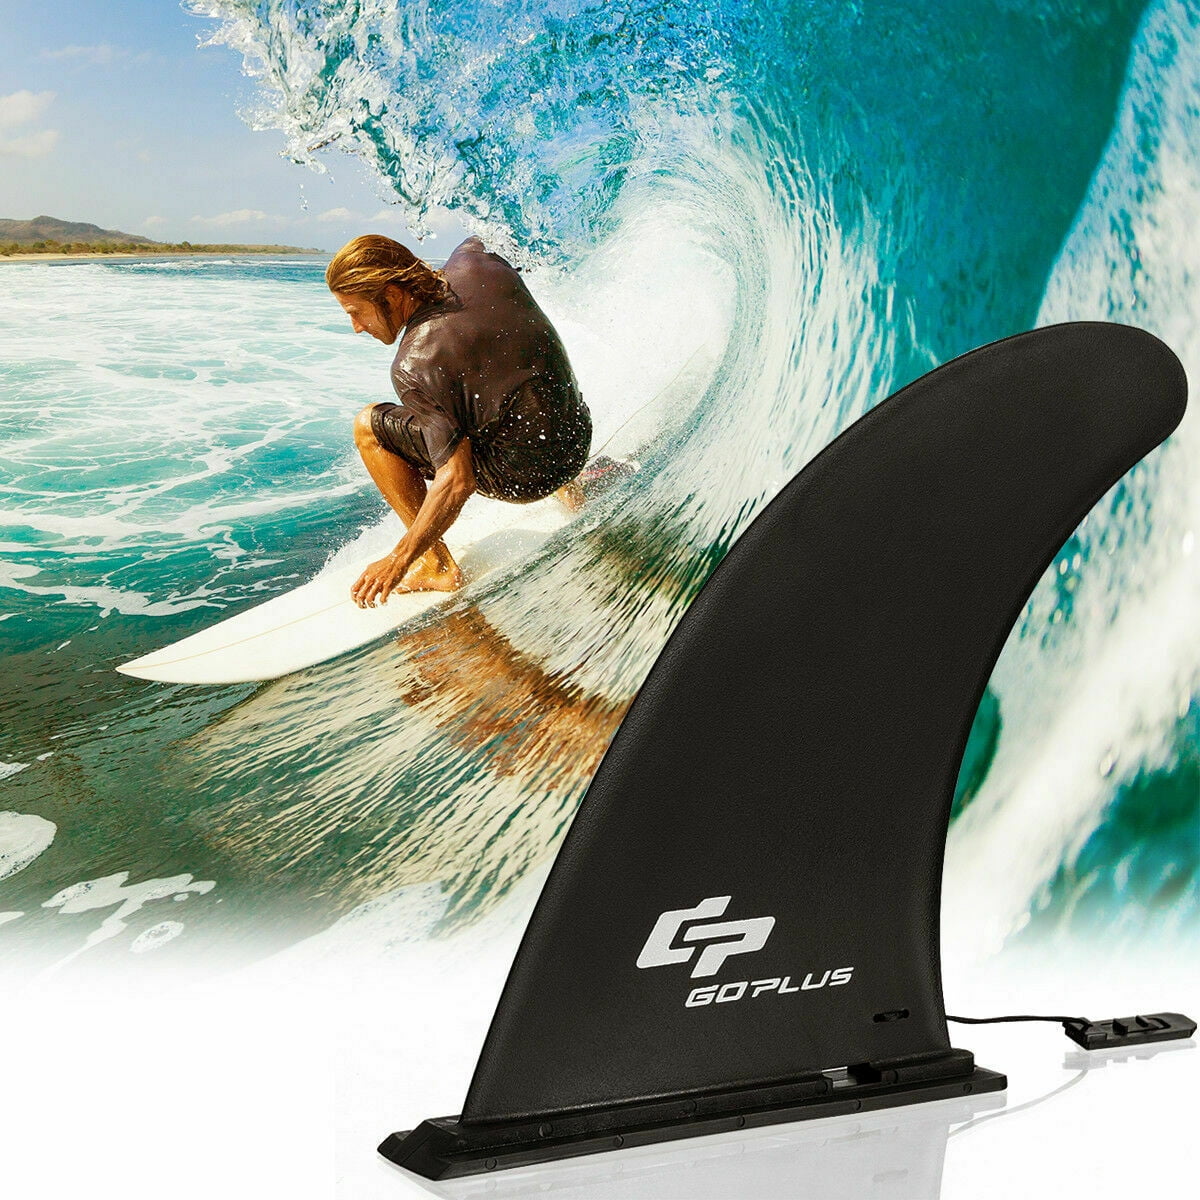 Center Fin 9 inches PVC Detachable SUP or Surfboard Long Board 